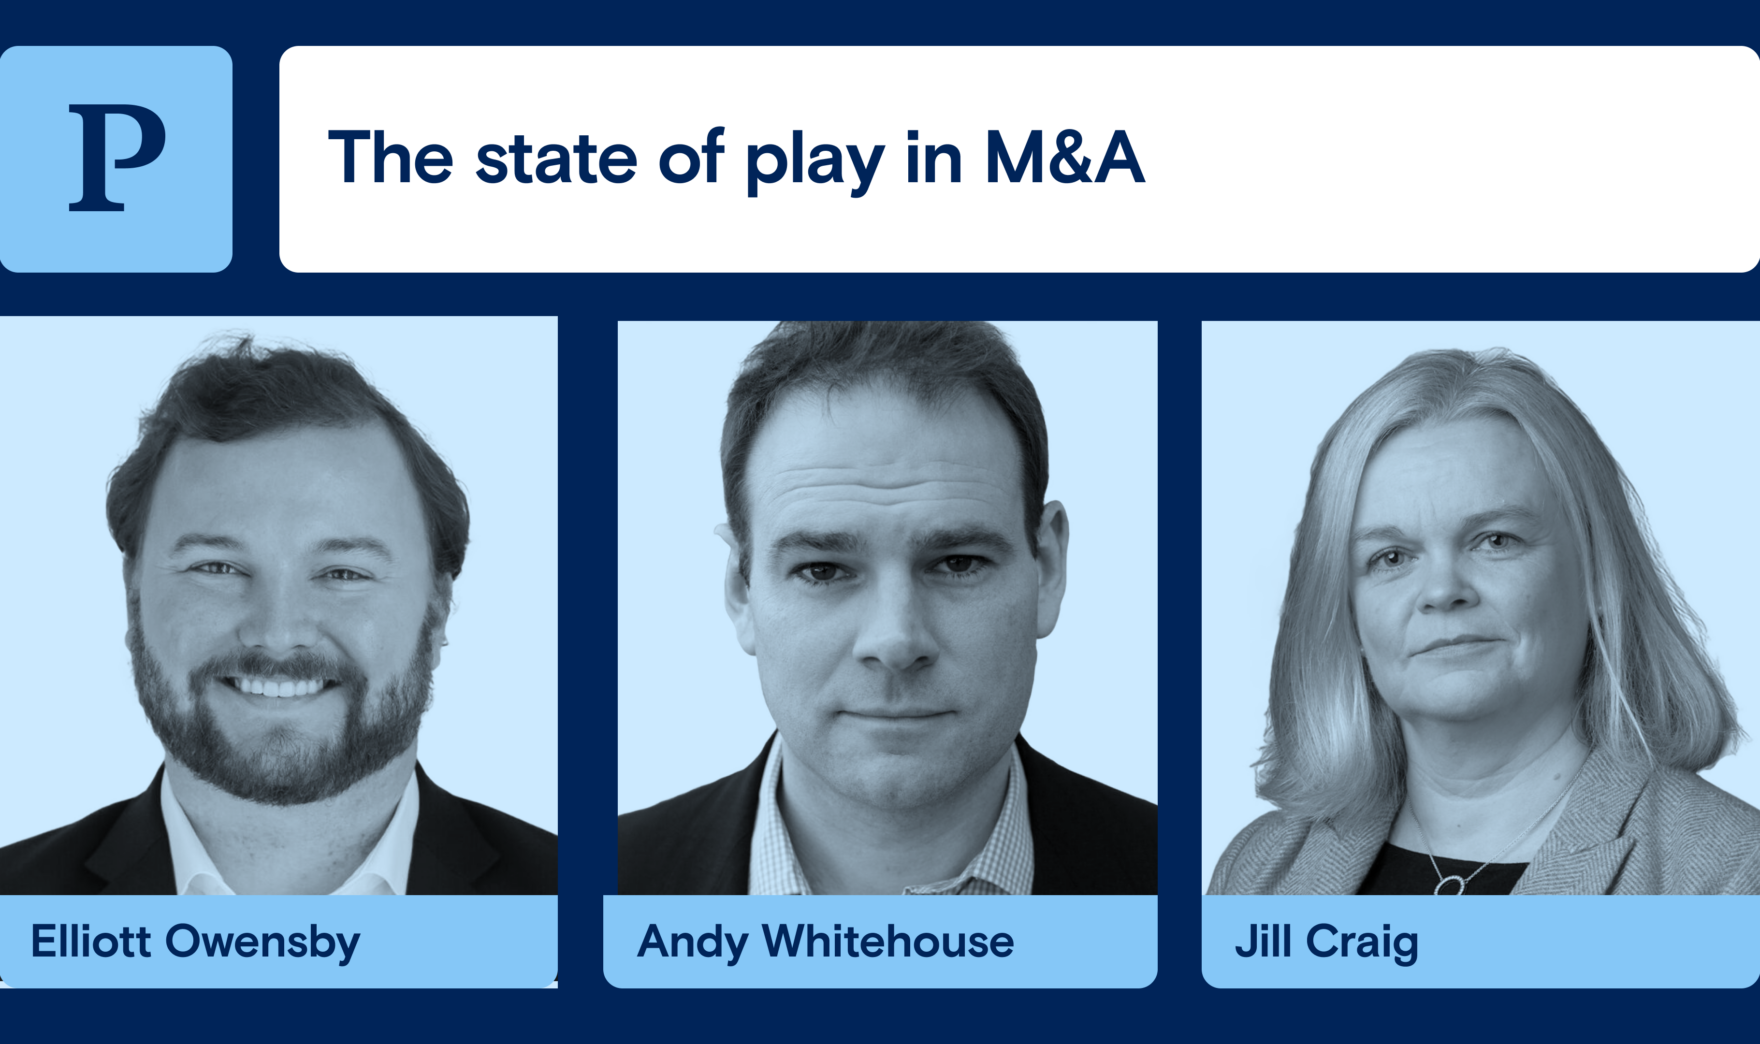 The state of play in M&A